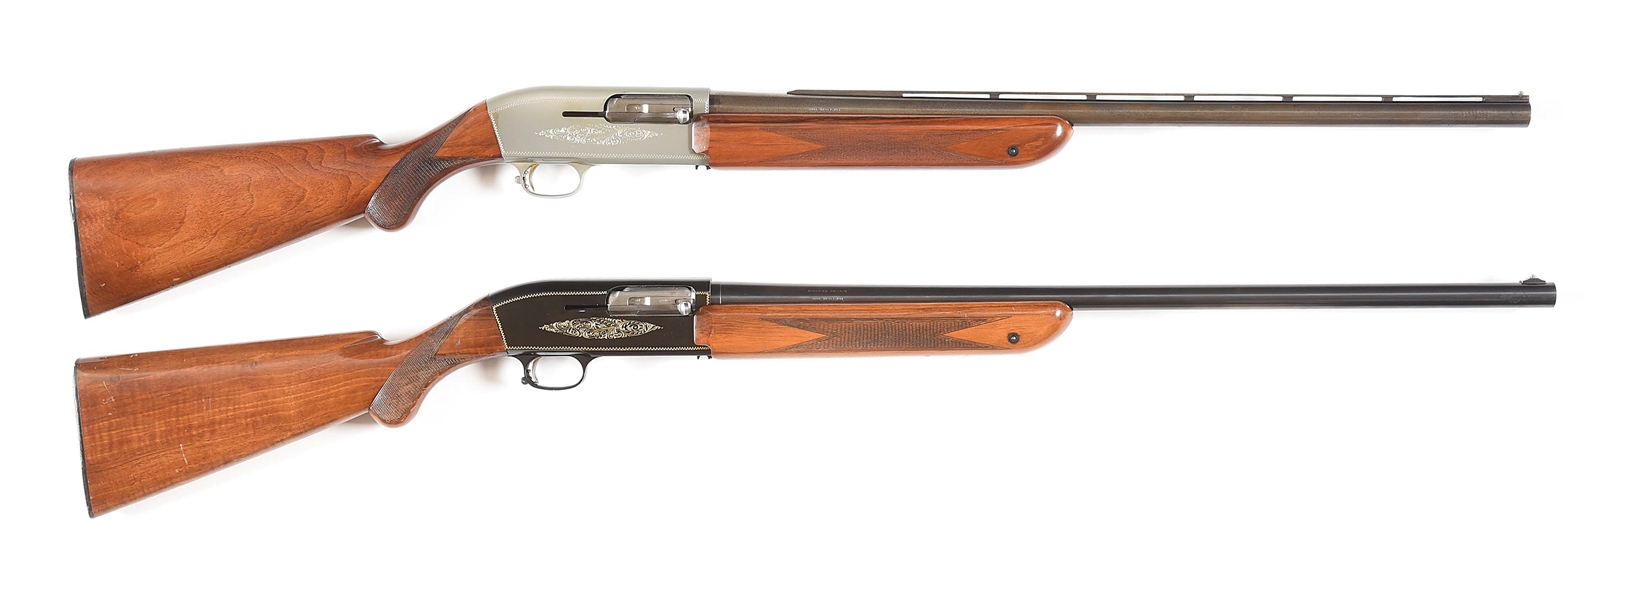 (M) LOT OF 2: BROWNING DOUBLE AUTOMATIC TWELVETTE AND BROWNING DOUBLE AUTOMATIC TWENTYWEIGHT SEMI-AUTOMATIC SHOTGUNS.